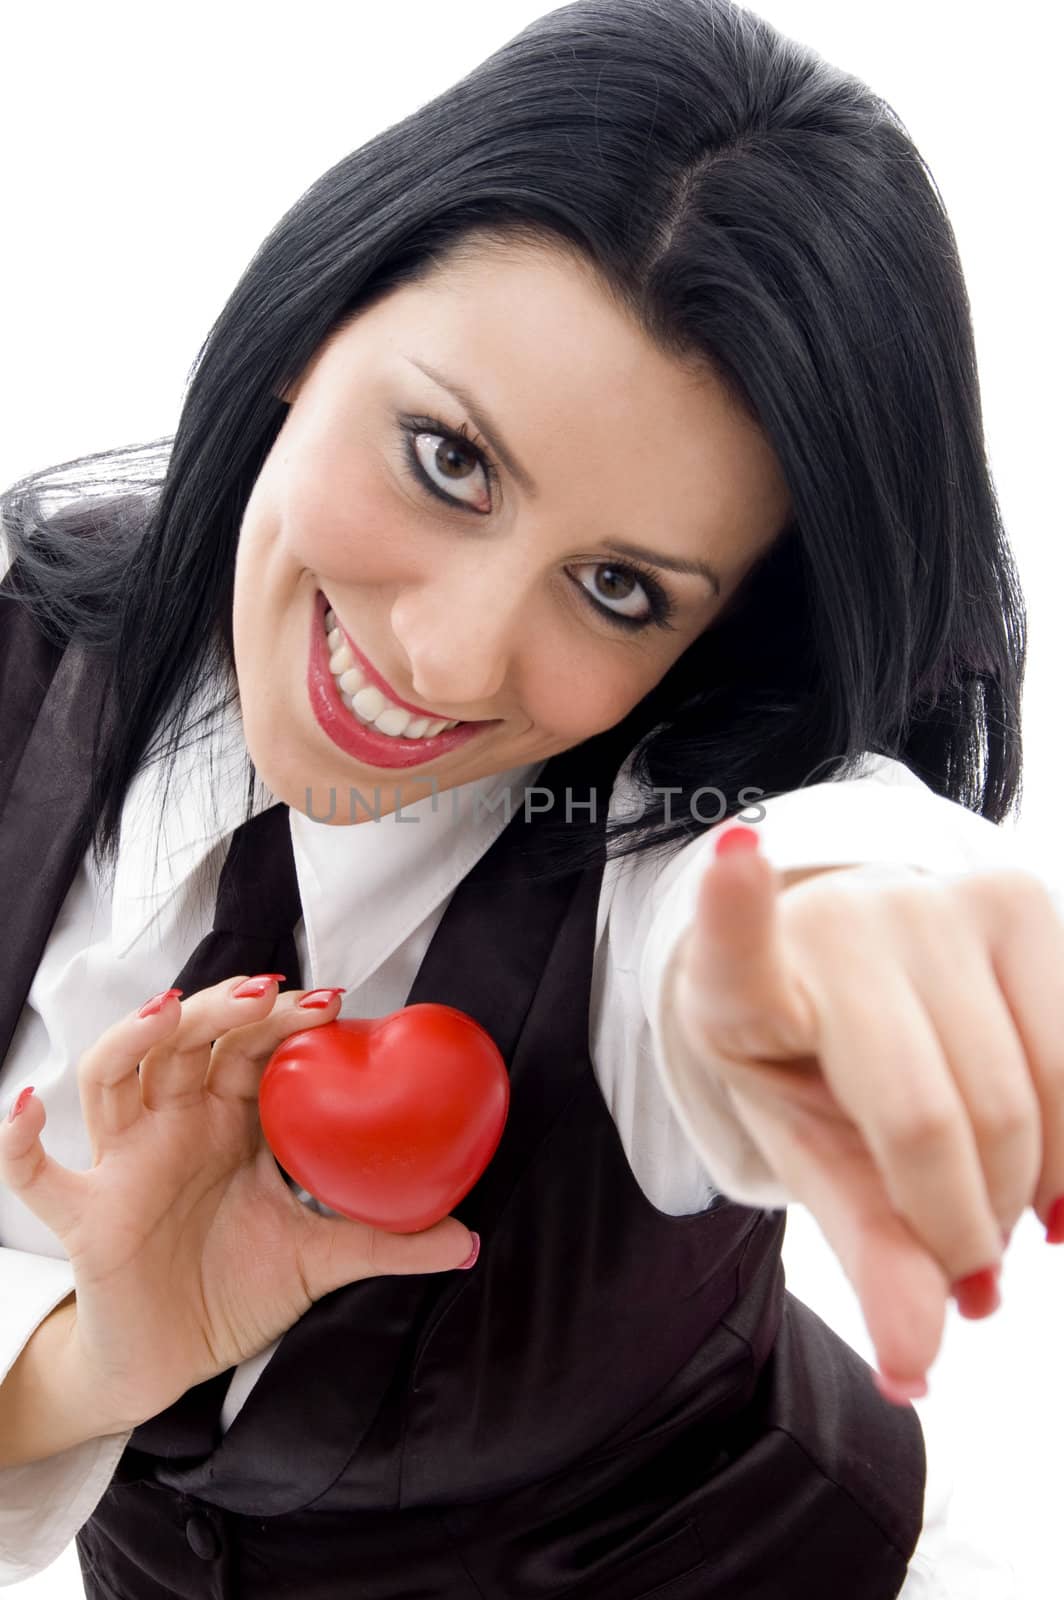 female holding a red heart pointing at camera against white background